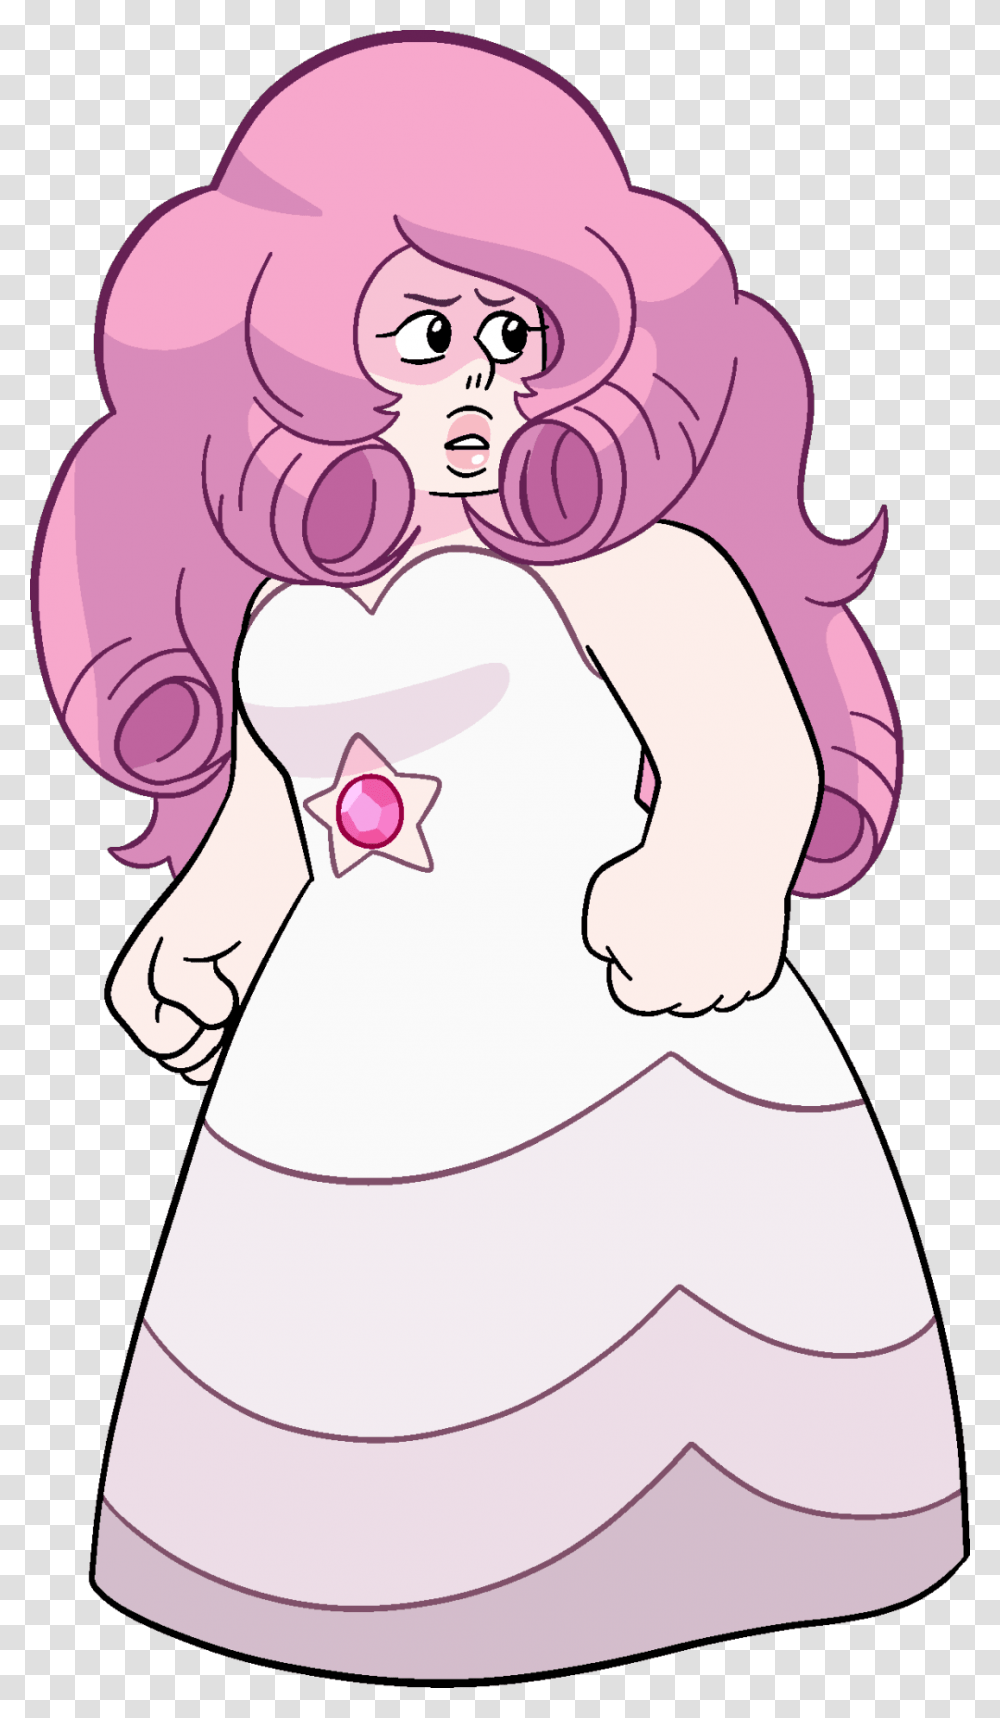 Made A Rose Quartz From A Draw Of The Crewniverse Rose Quartz Youtube, Mouth, Lip, Throat Transparent Png